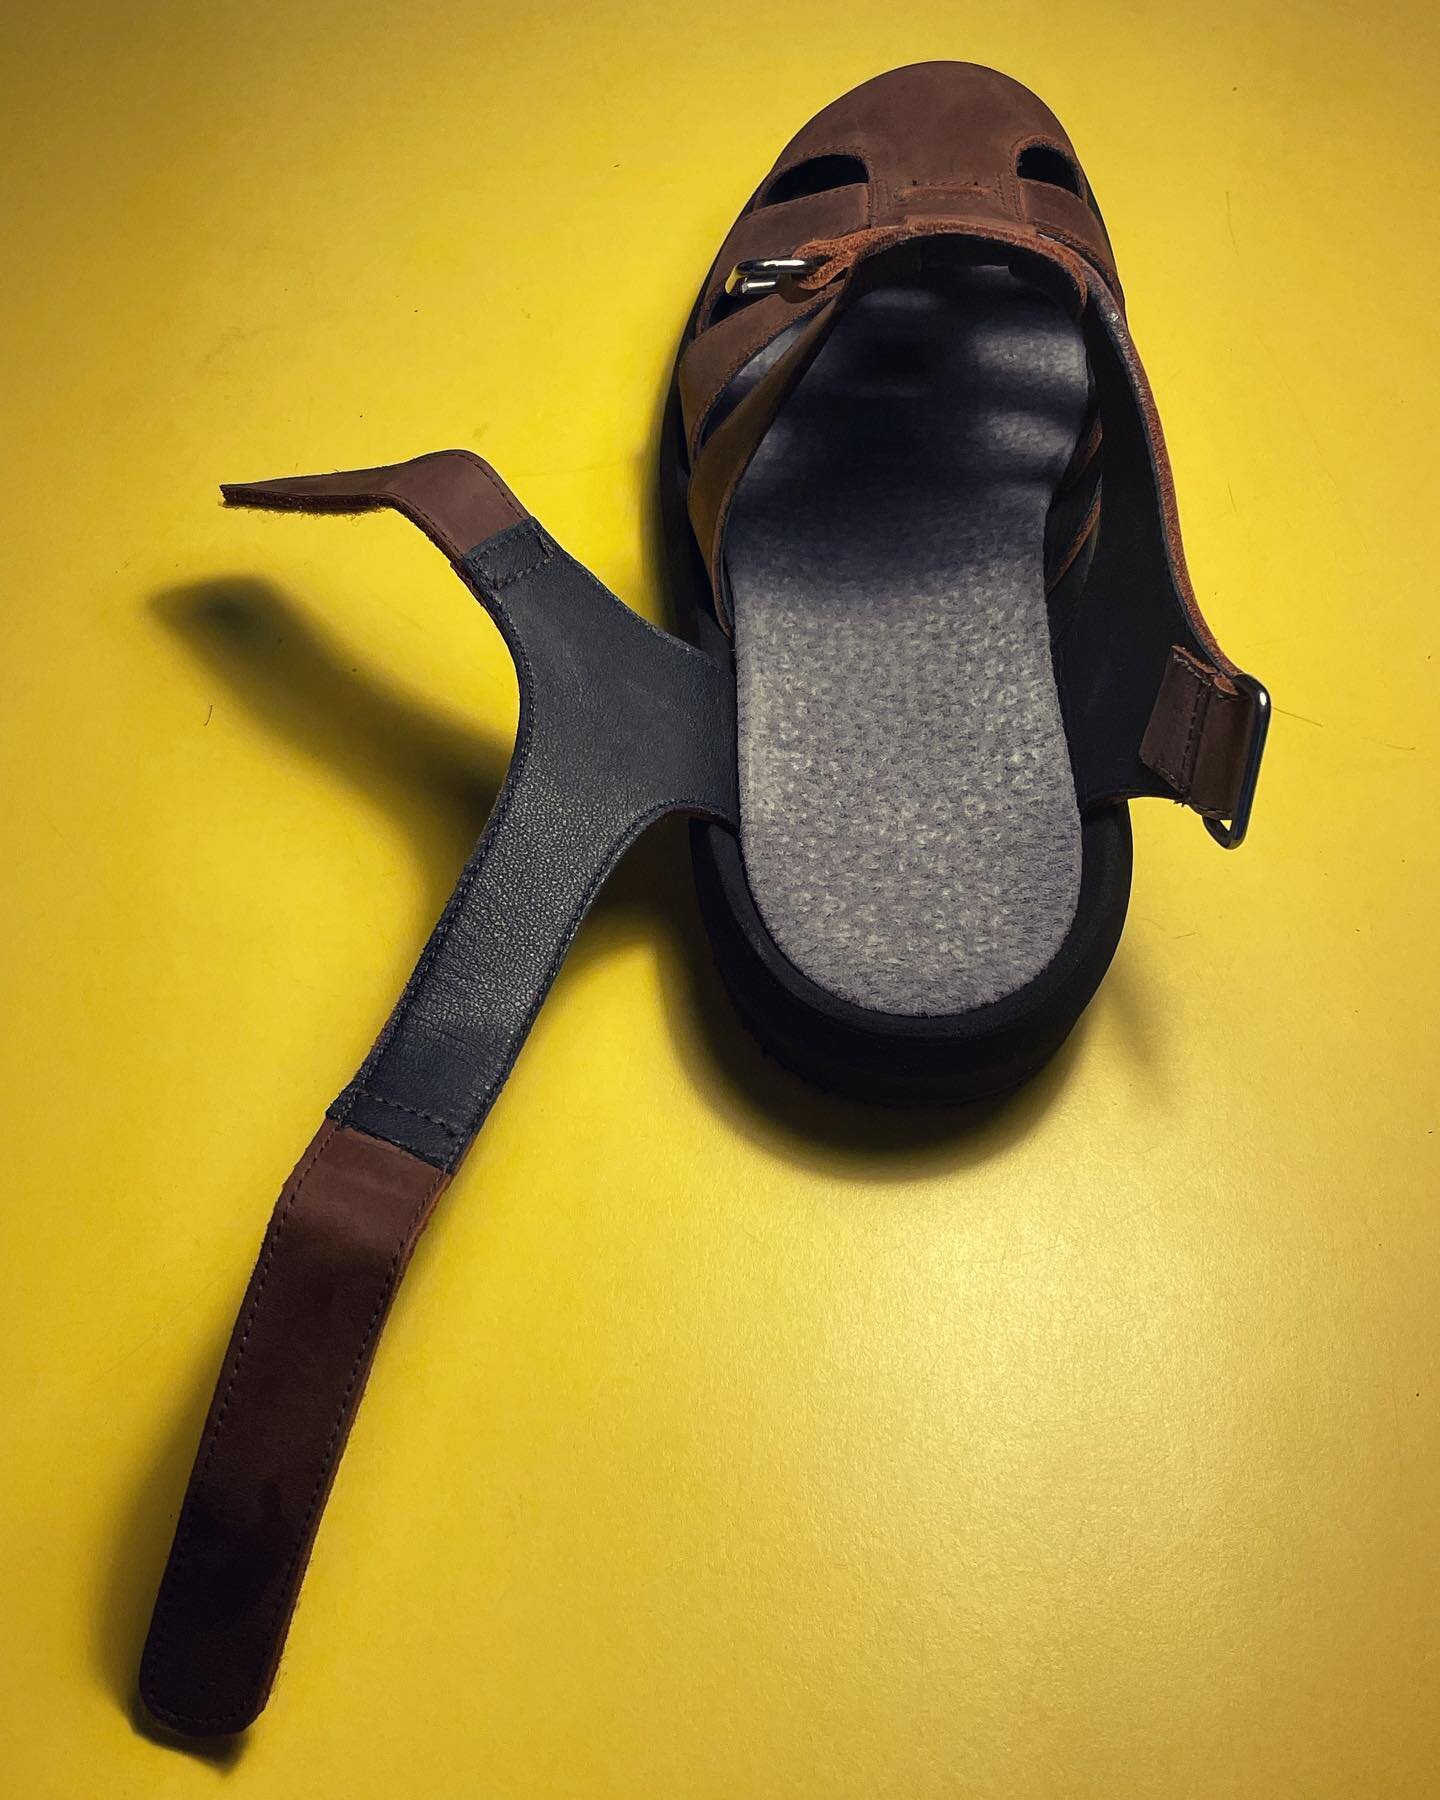 Here is a custom sandal using a @keen as a model, with easy access and lifted for a 3cm difference and a fused ankle